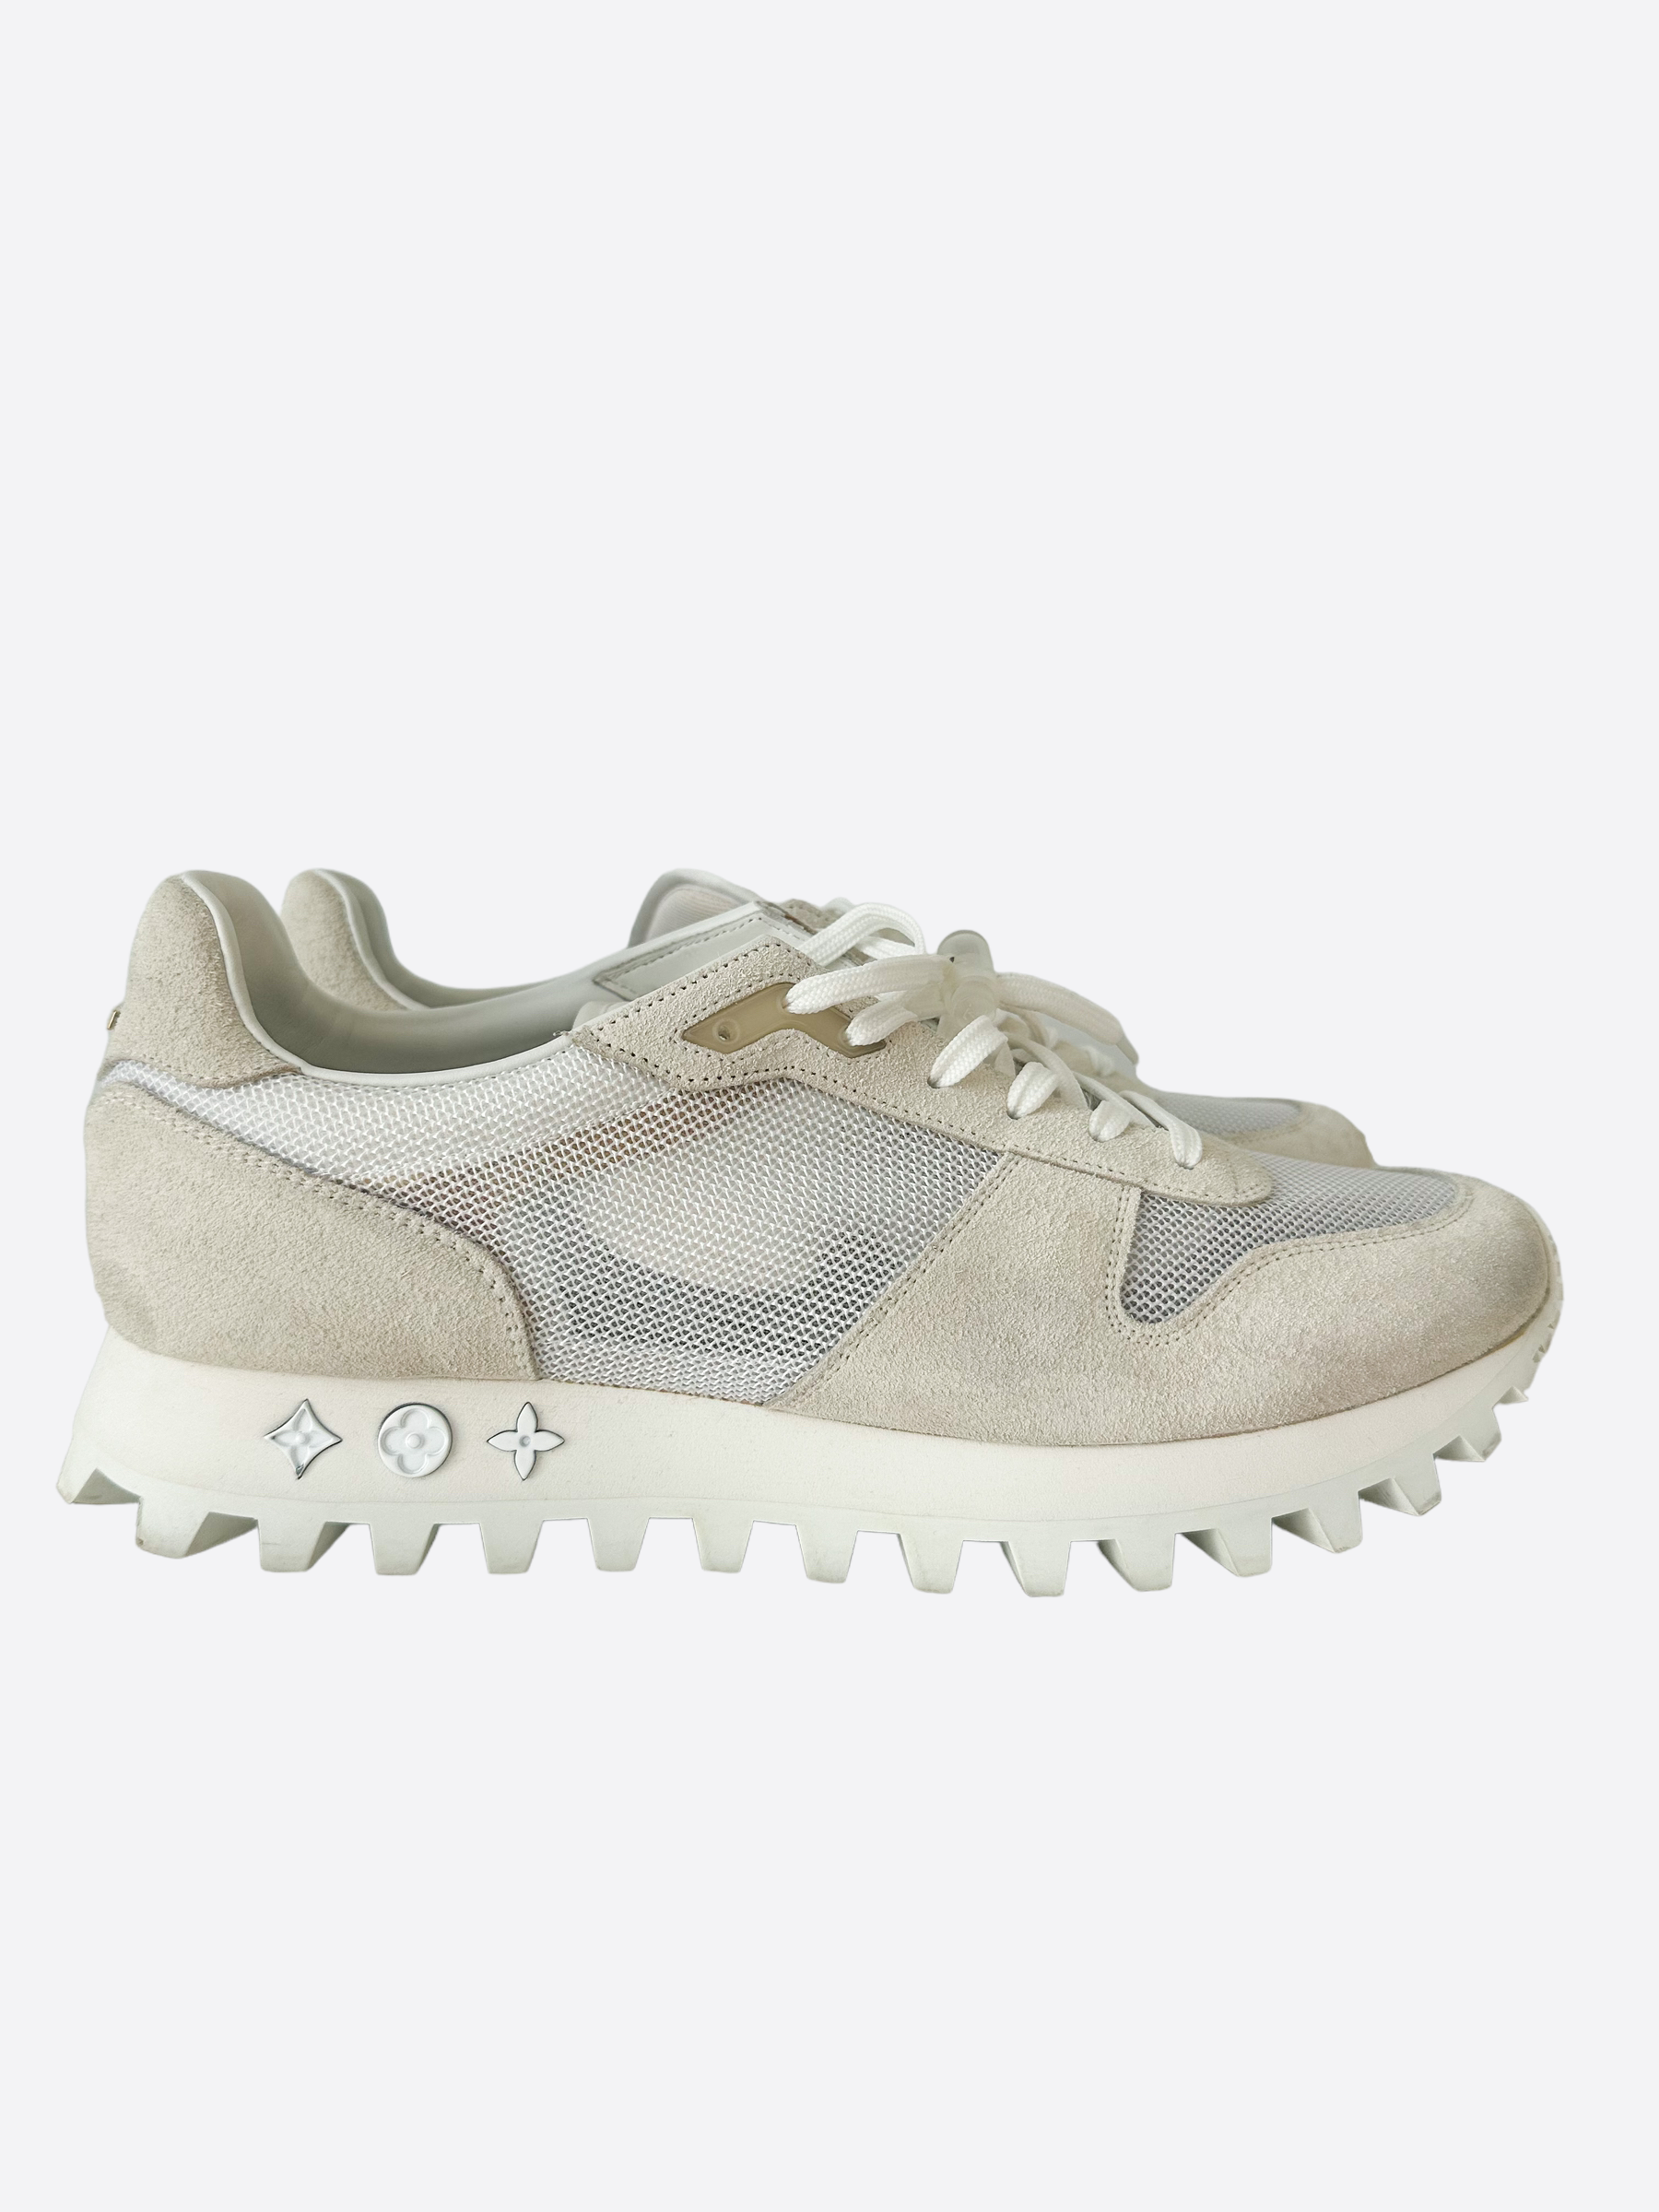 Louis Vuitton LV Monogram Mesh Accents Chunky Sneakers - White Sneakers,  Shoes - LOU773860